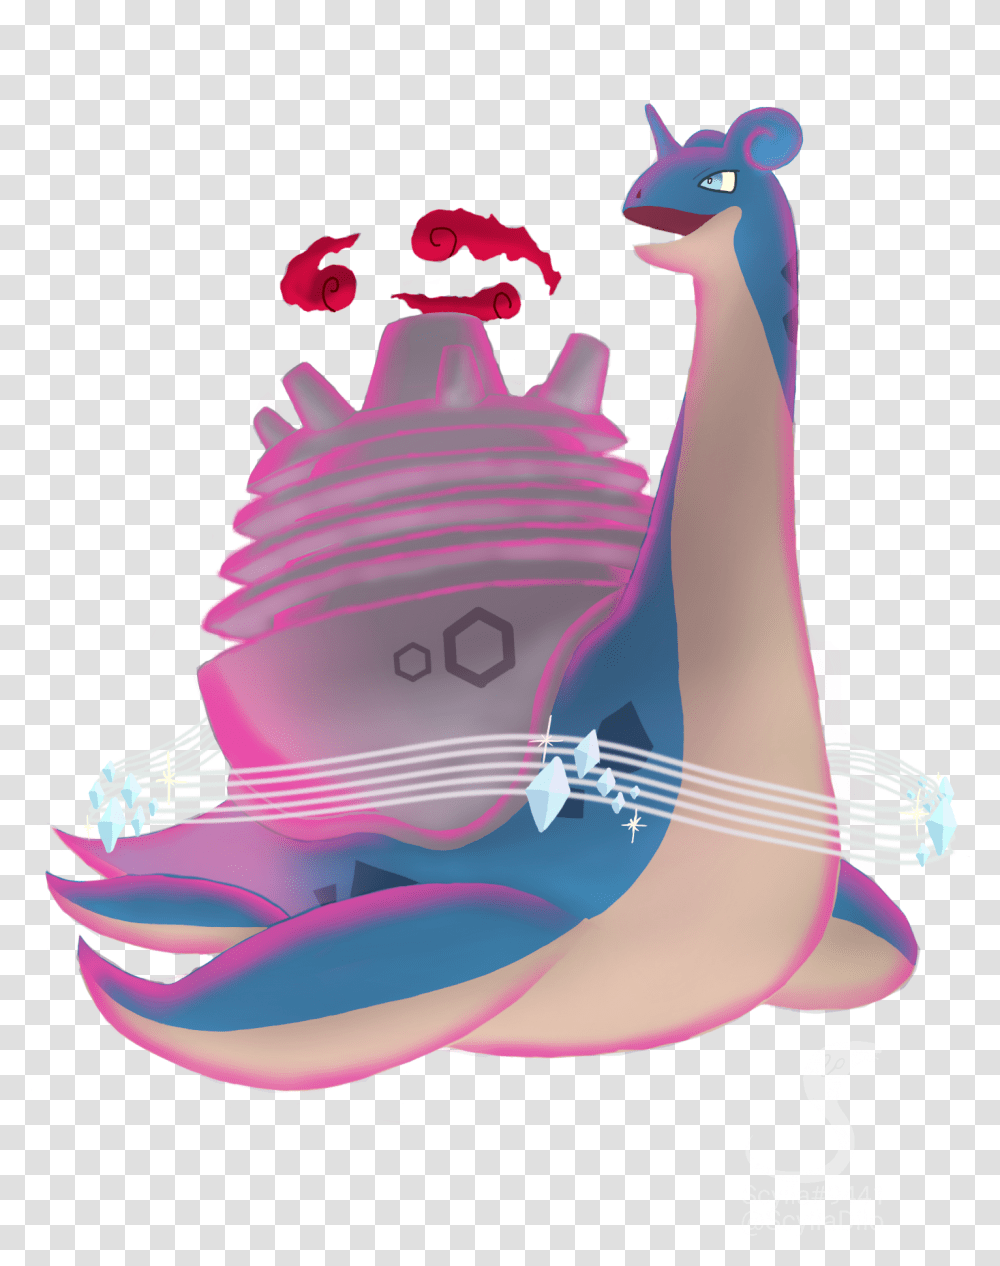 Drew This G Max Lapras Any Thoughts Pokemon G Max Lapras, Graphics, Art, Animal, Outdoors Transparent Png